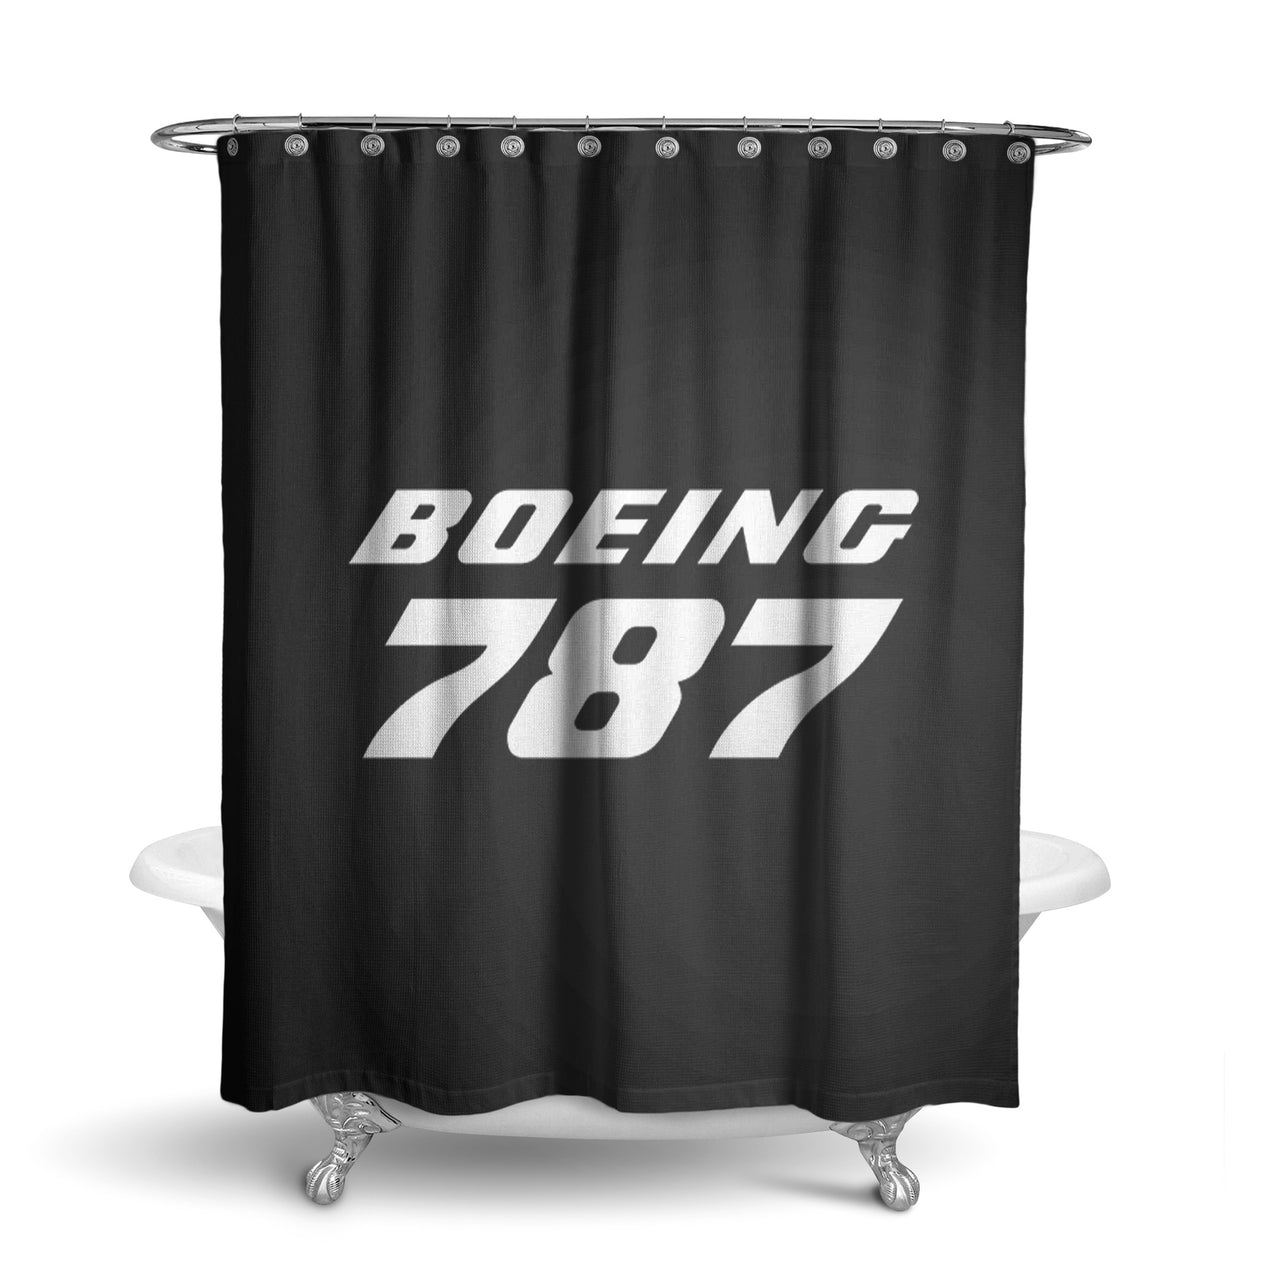 Boeing 787 & Text Designed Shower Curtains